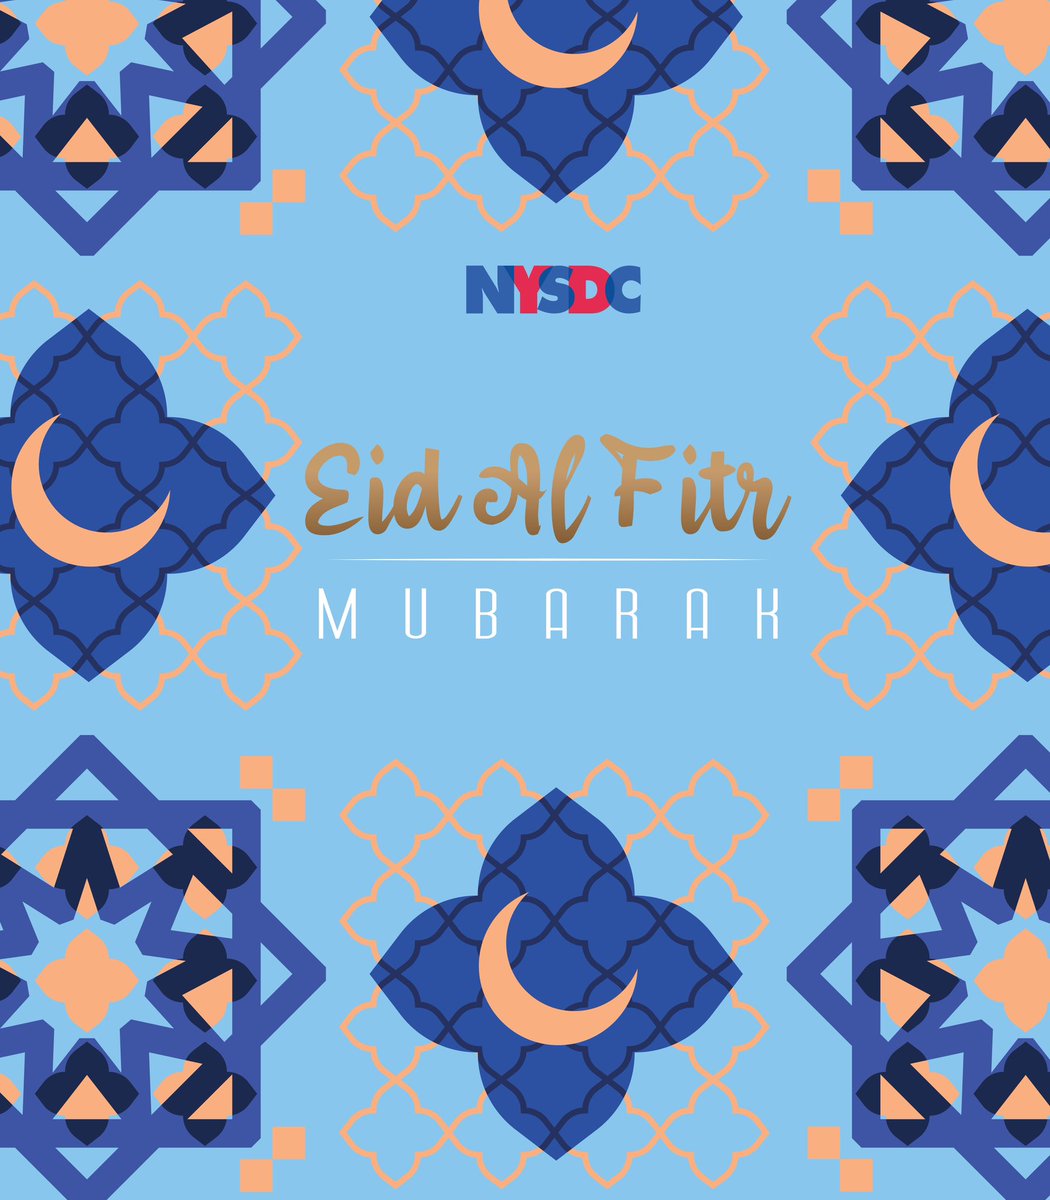 Wishing a happy and healthy Eid-Al-Fitr to all of my Muslim neighbors as they celebrate the end of the holy month of Ramadan. #EidMubarak!